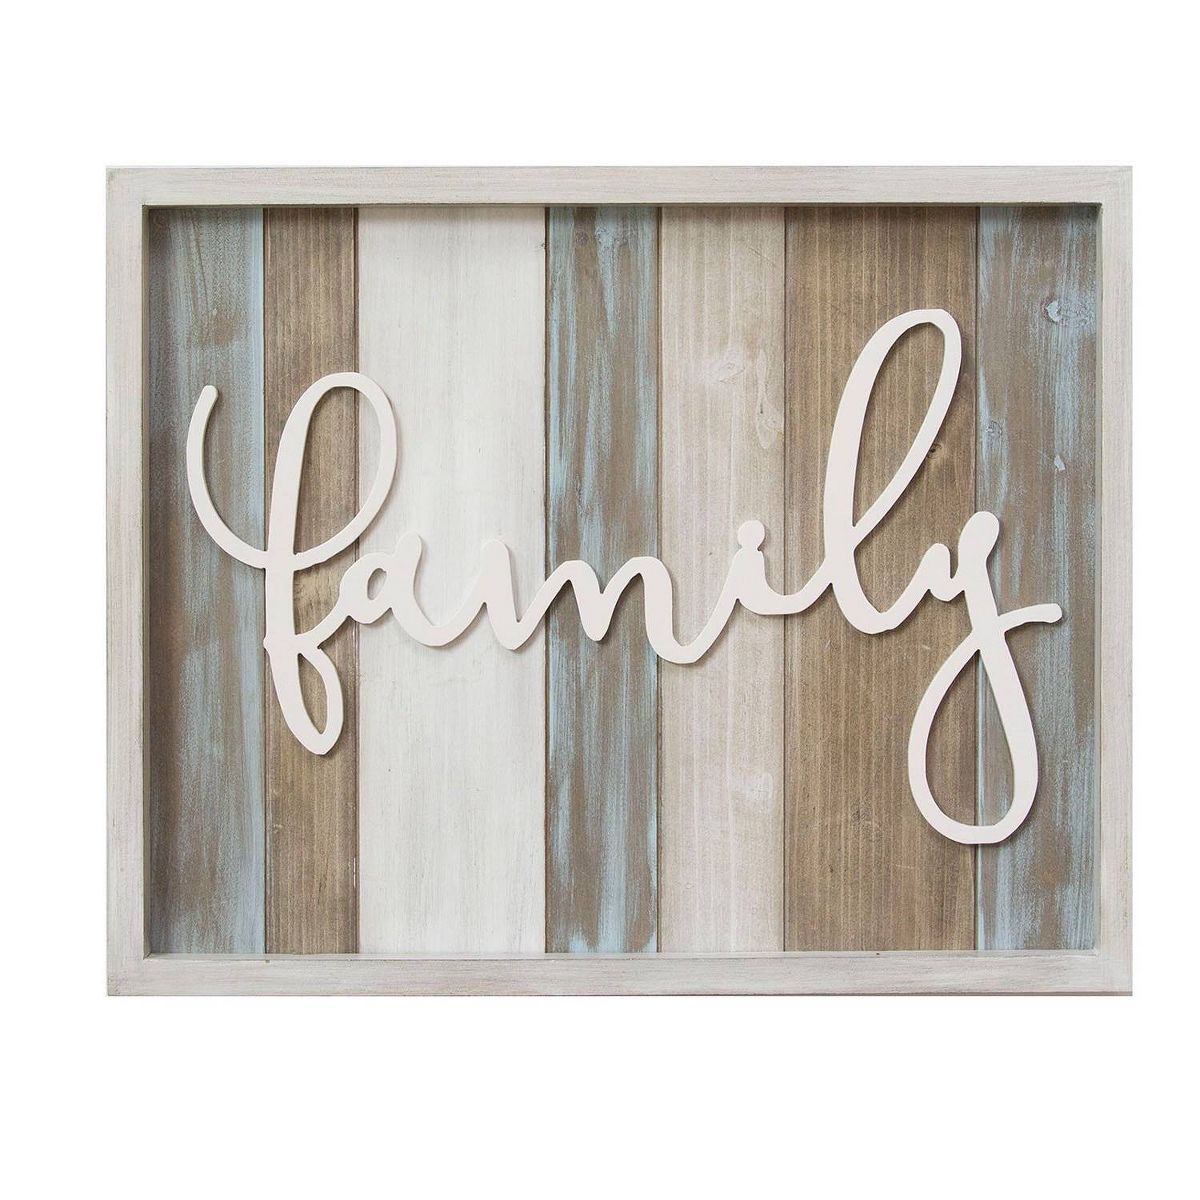 'Family' Rustic Wood Wall Decor - Stratton Home Decor | Target